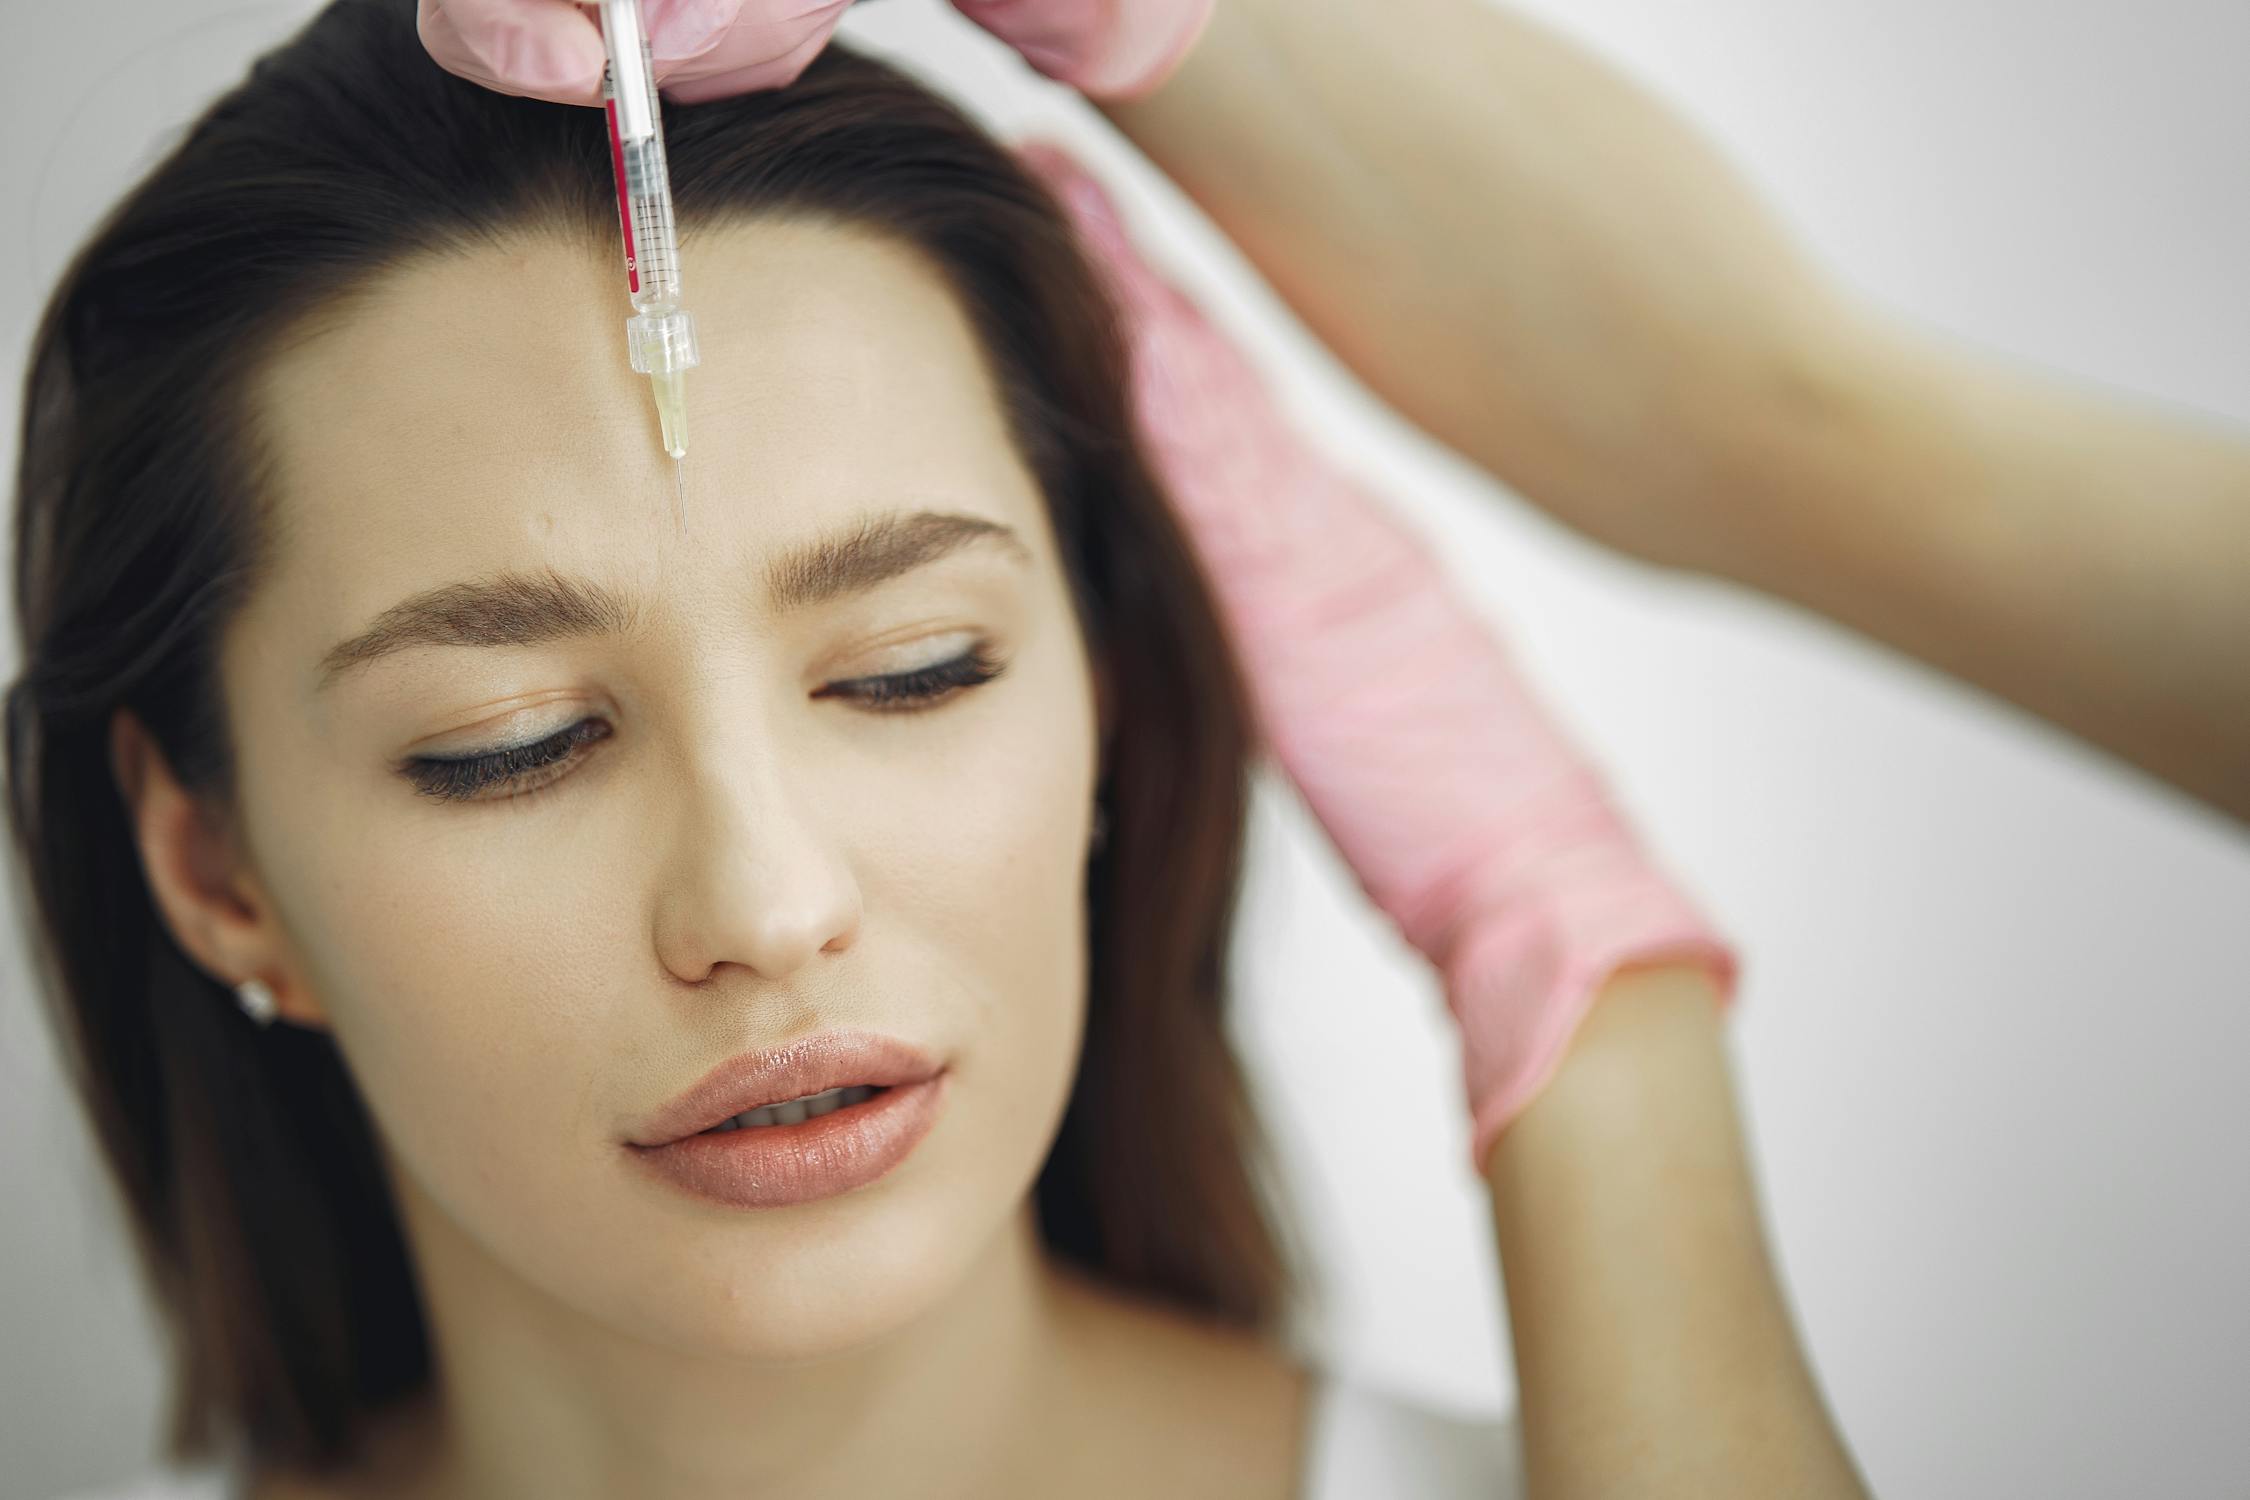 Ways You Can Prepare For Your First Botox Appointment